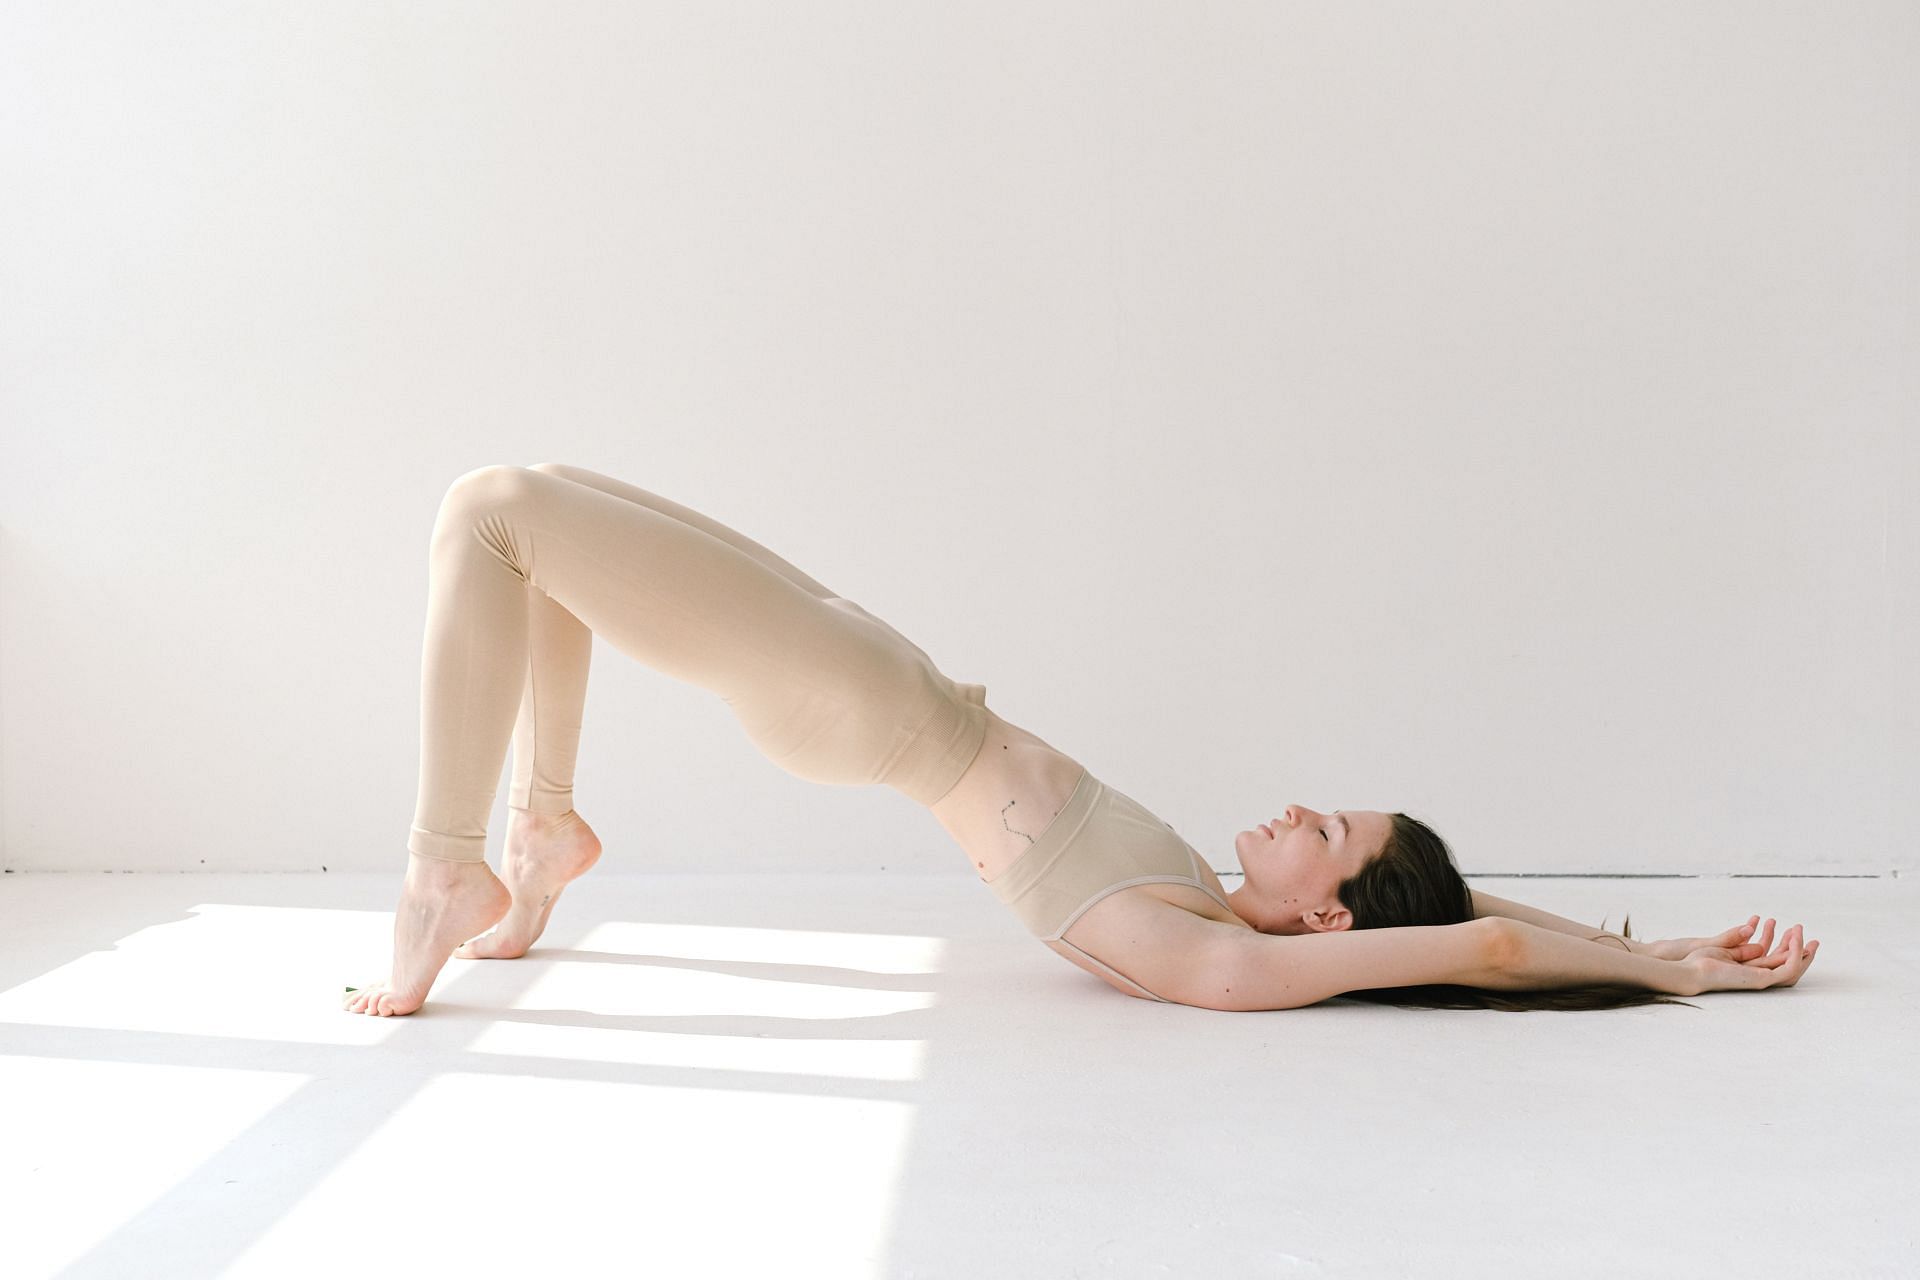 To perform this stretch, lie on your back. (Photo via Pexels/Anna Shvets)